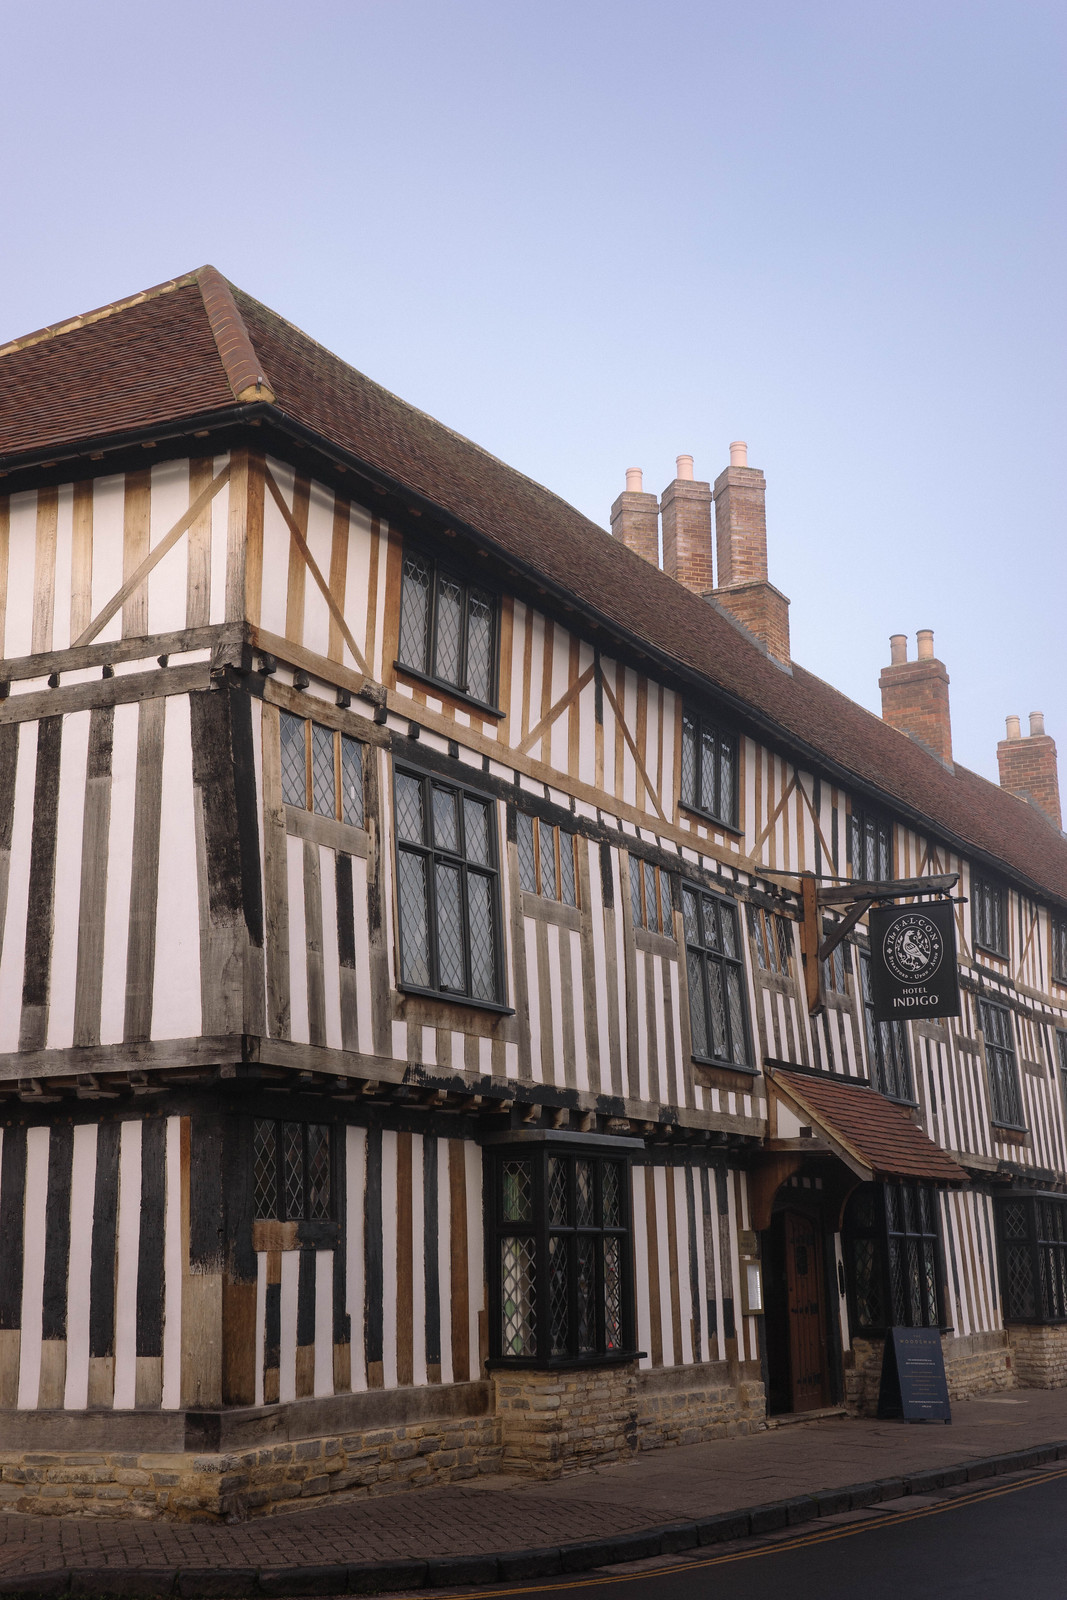 AD / 24 Hours in Stratford-Upon-Avon